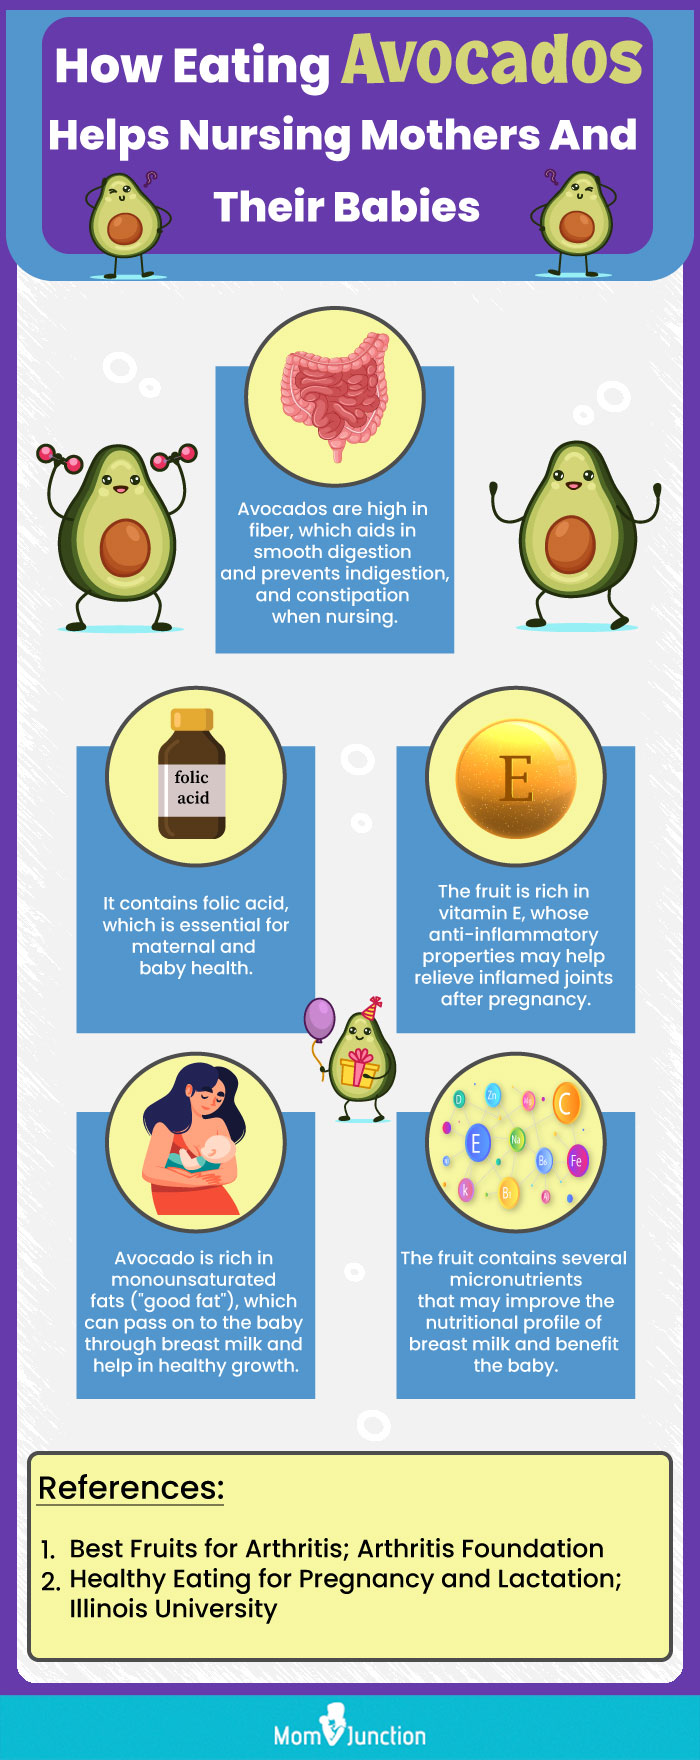 how eating avocados helps nursing mothers and their babies (infographic)